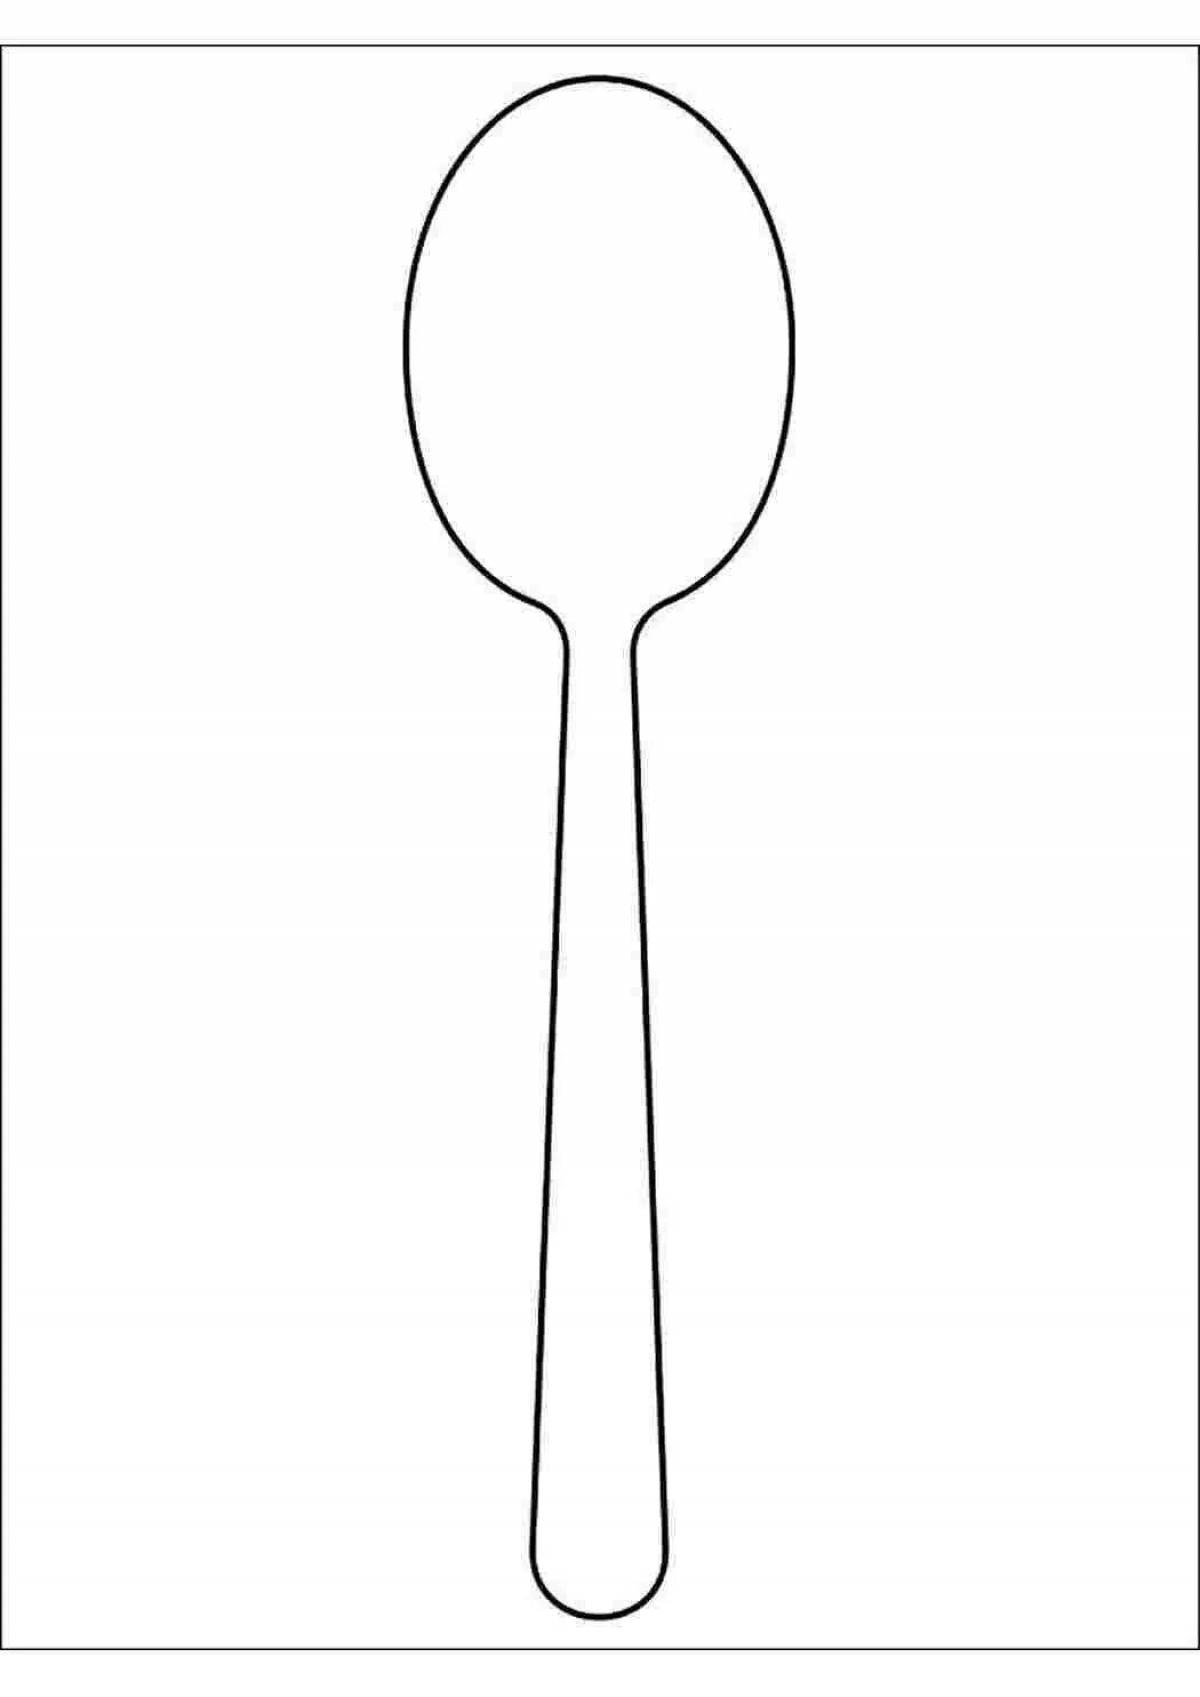 Dishes spoon #4